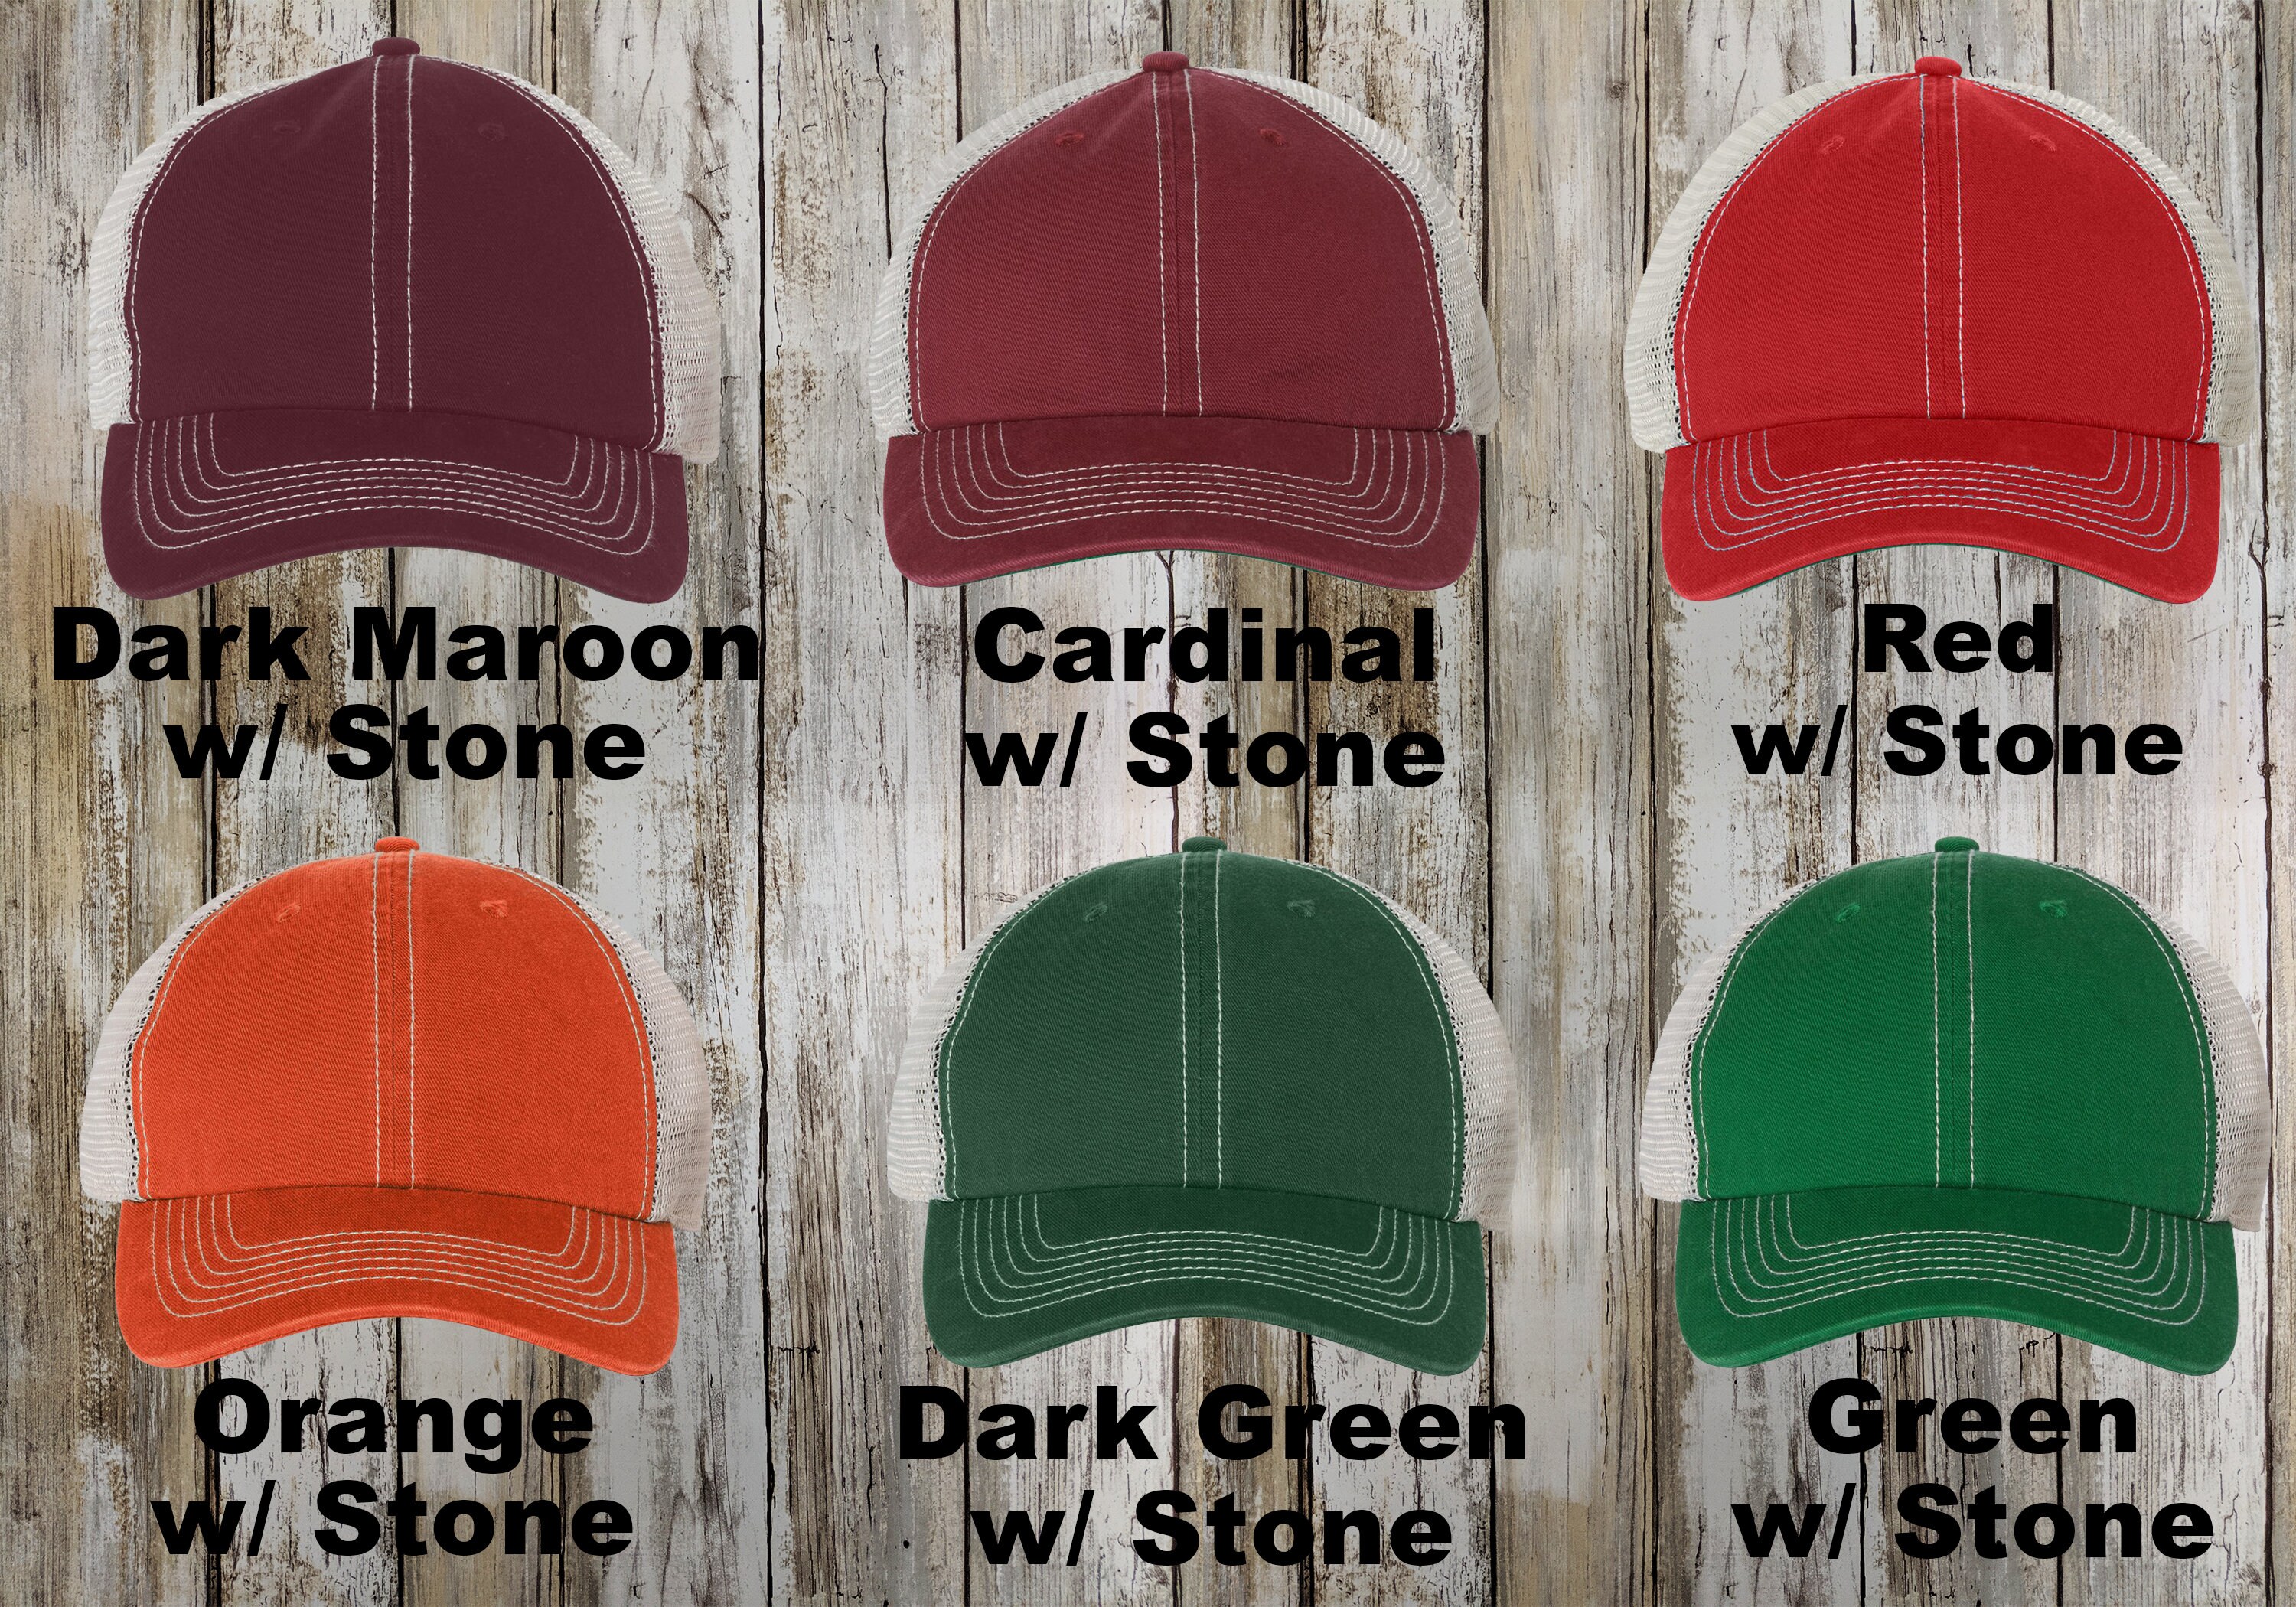 47 Brand Custom Trucker Hat / Trawler Cap / Personalized Mesh Caps / Unstructured / Embroidered 6 Panel / Bachelor Party Hats